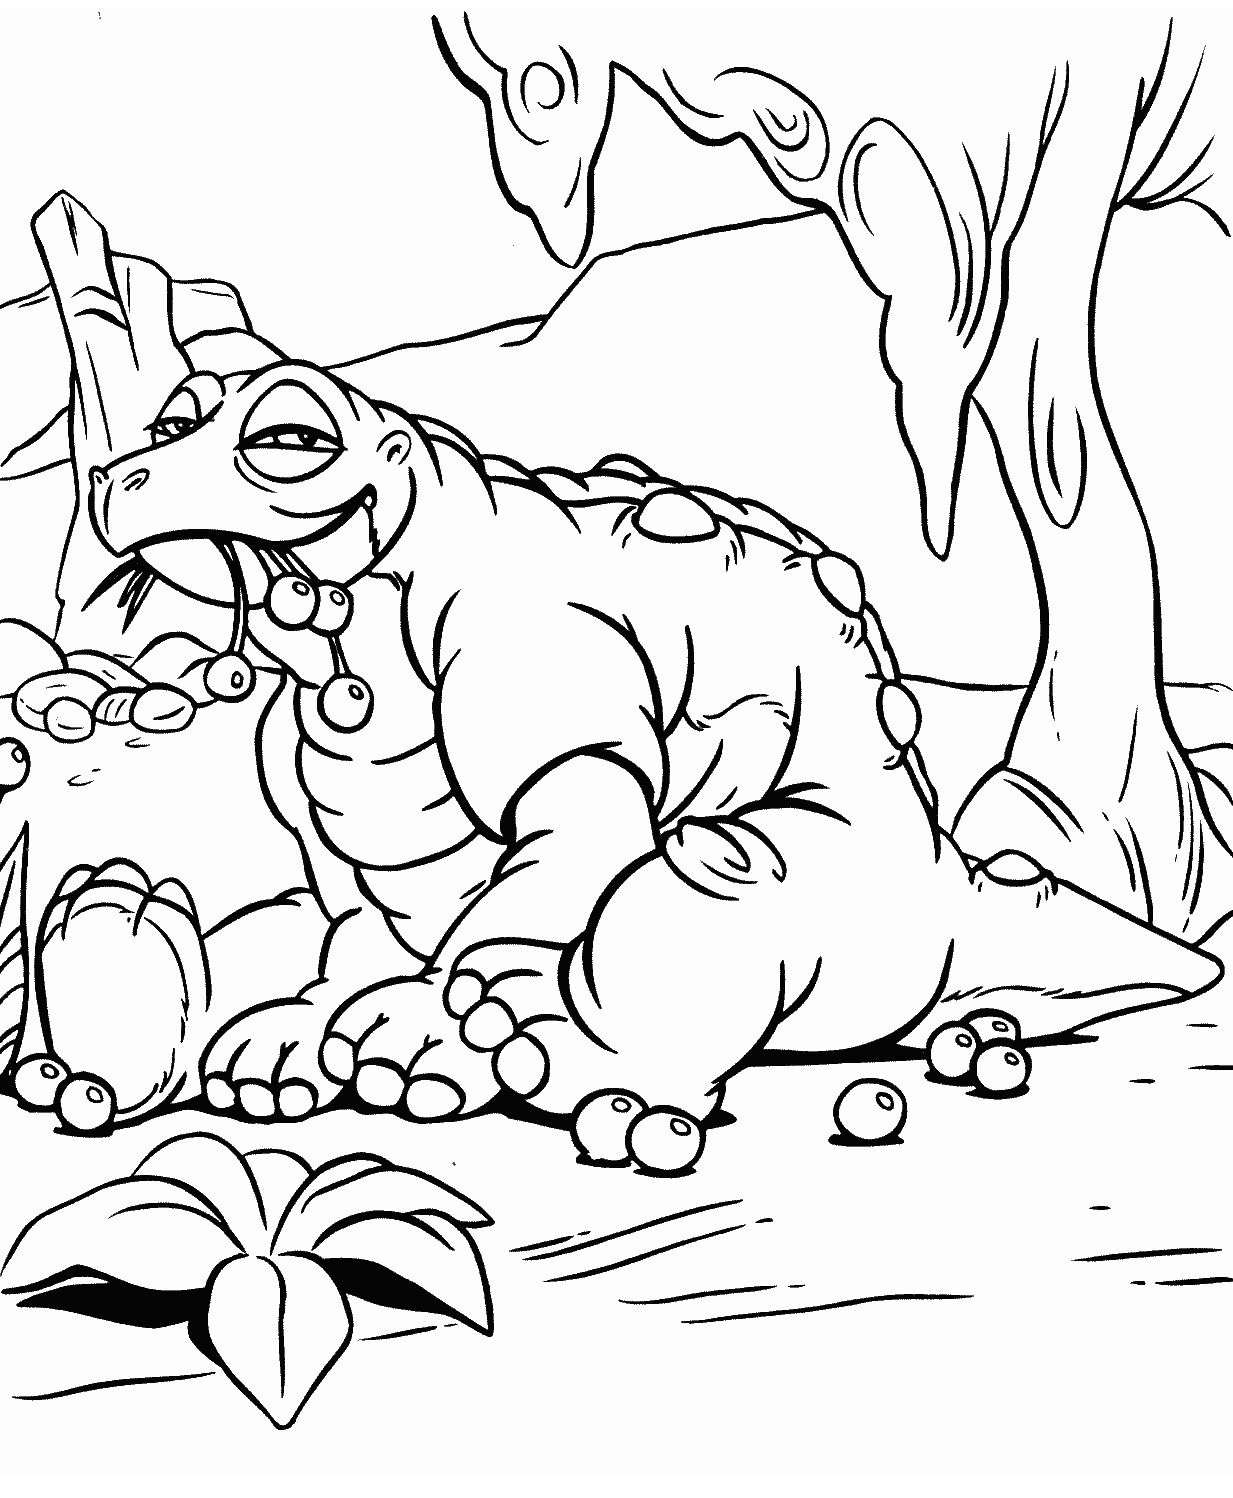 Dinosaur Lf7 Animals Coloring Pages